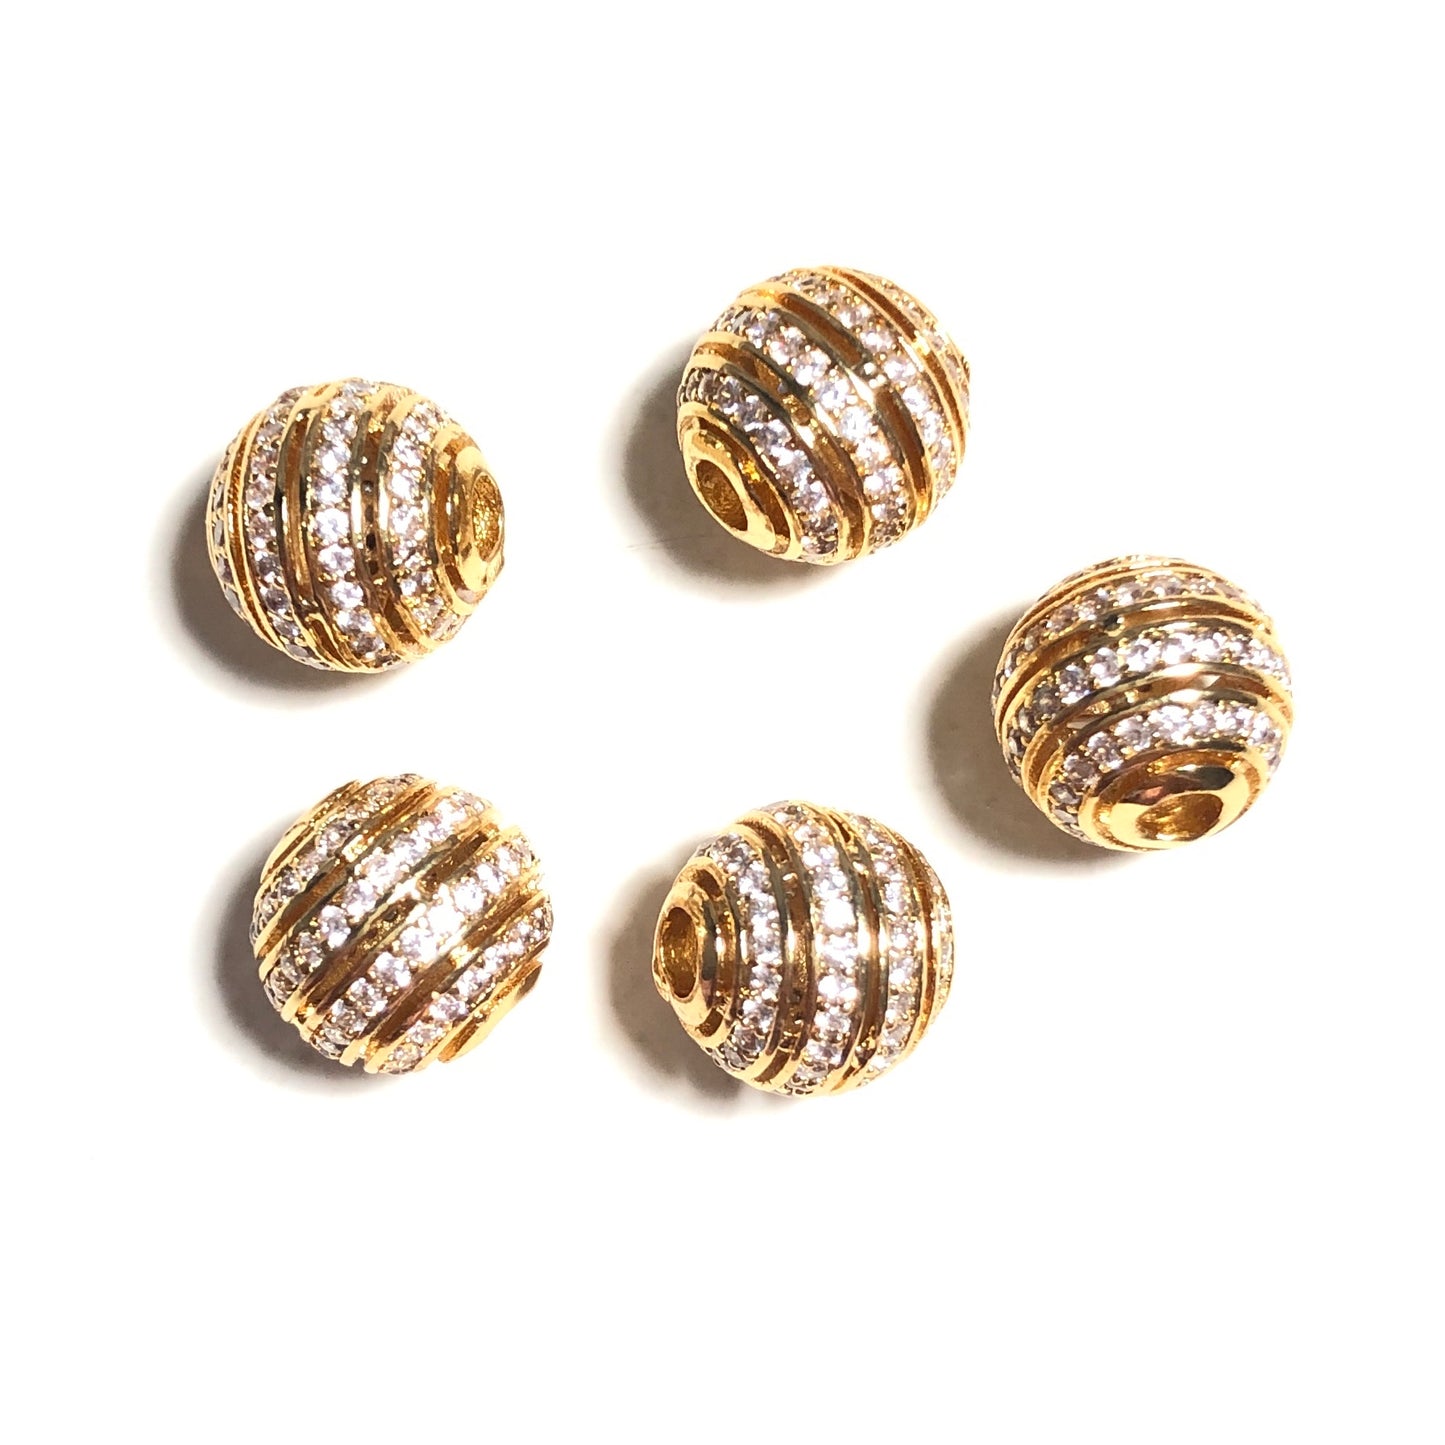 20pcs/lot 10mm CZ Paved Hollow Round Ball Spacers Gold CZ Paved Spacers 10mm Beads Ball Beads Charms Beads Beyond